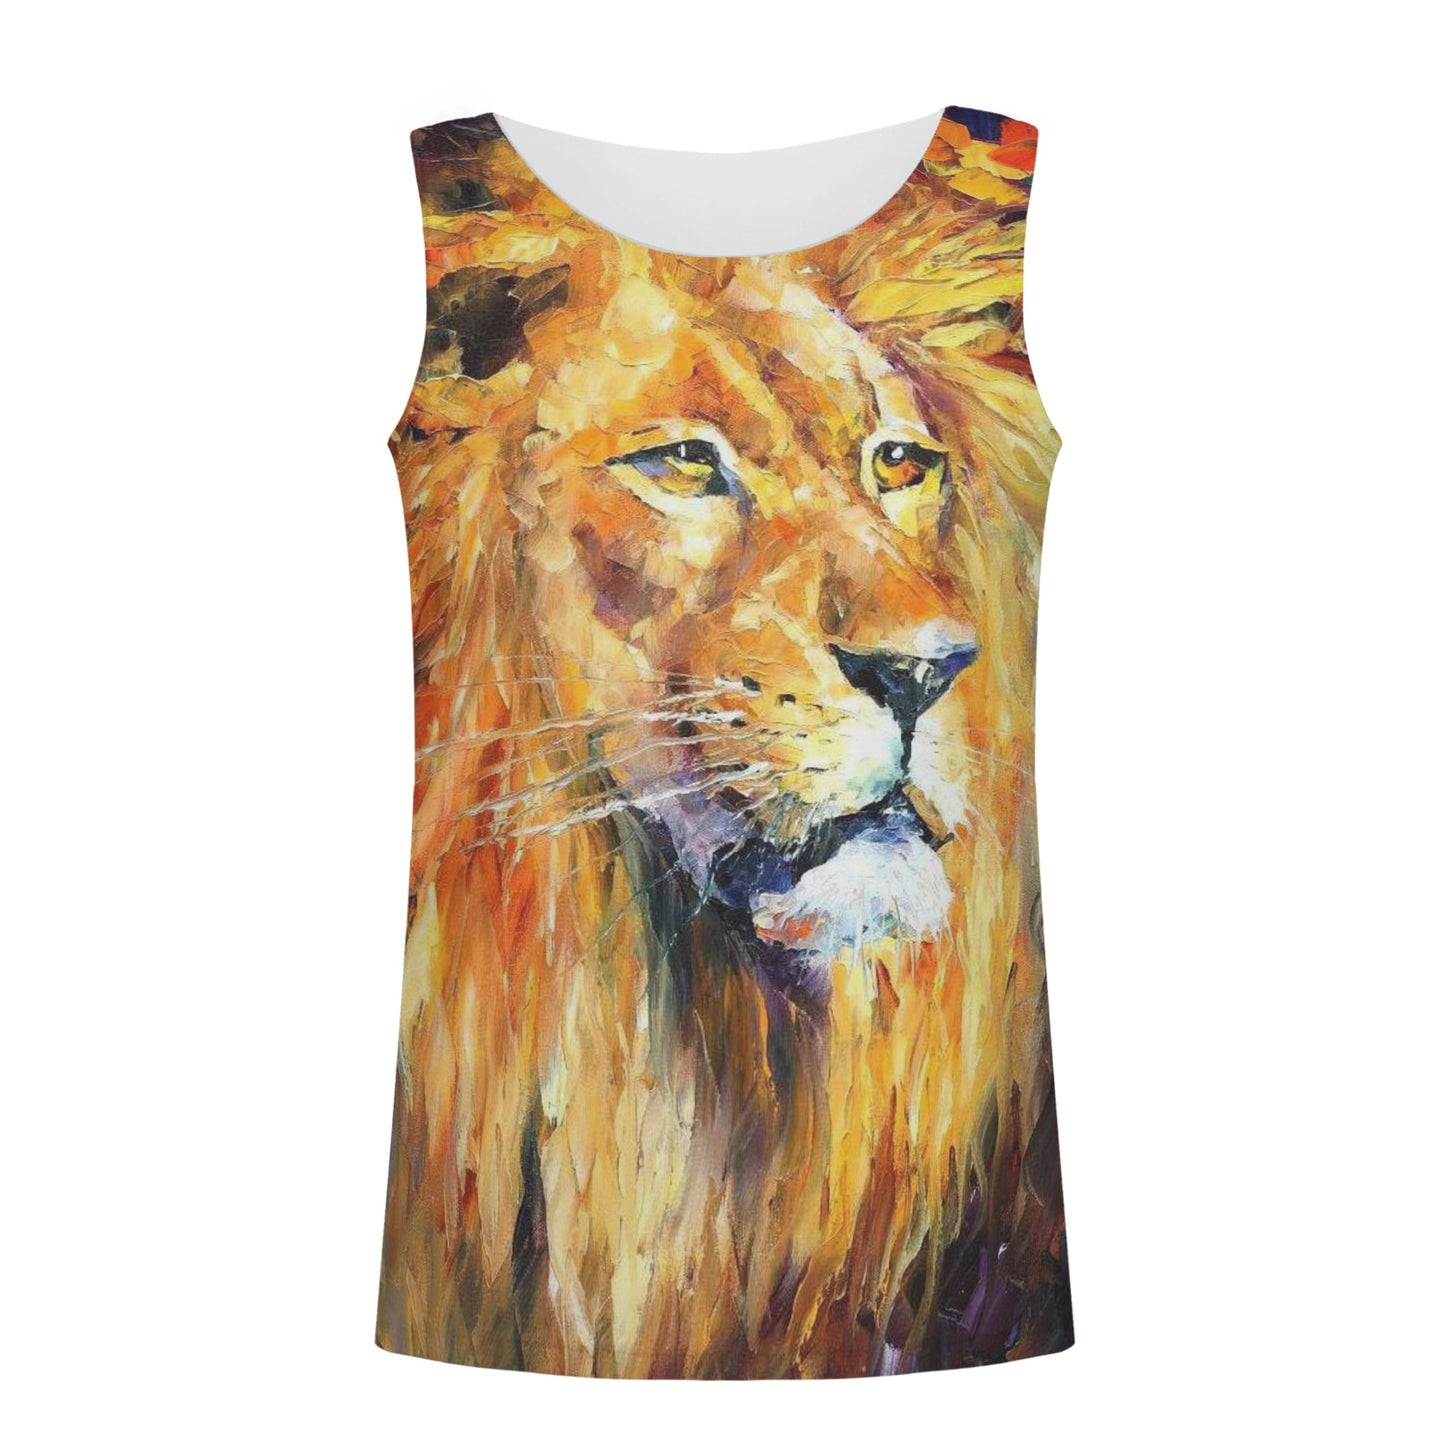 A LION Men's All Over Print Tank